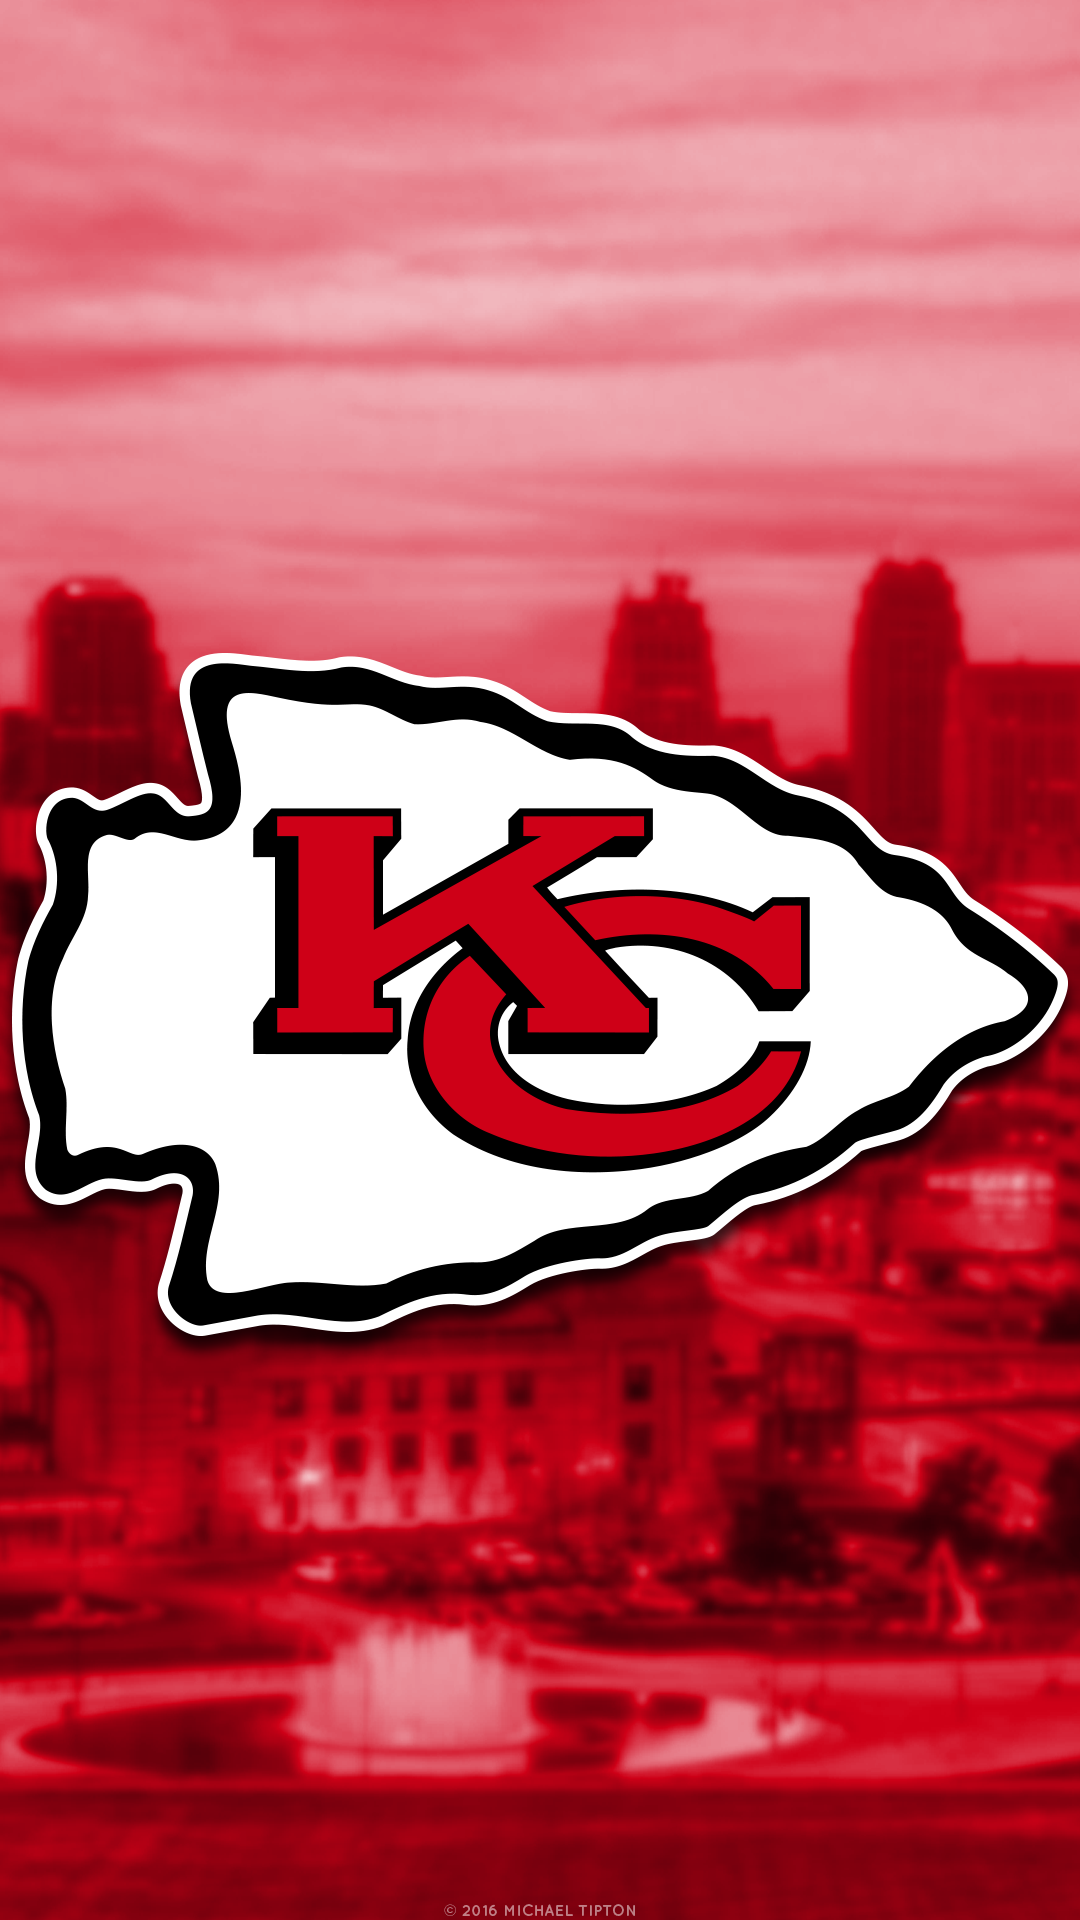 Kansas City Chiefs Phone Wallpaper by Michael Tipton - Mobile Abyss